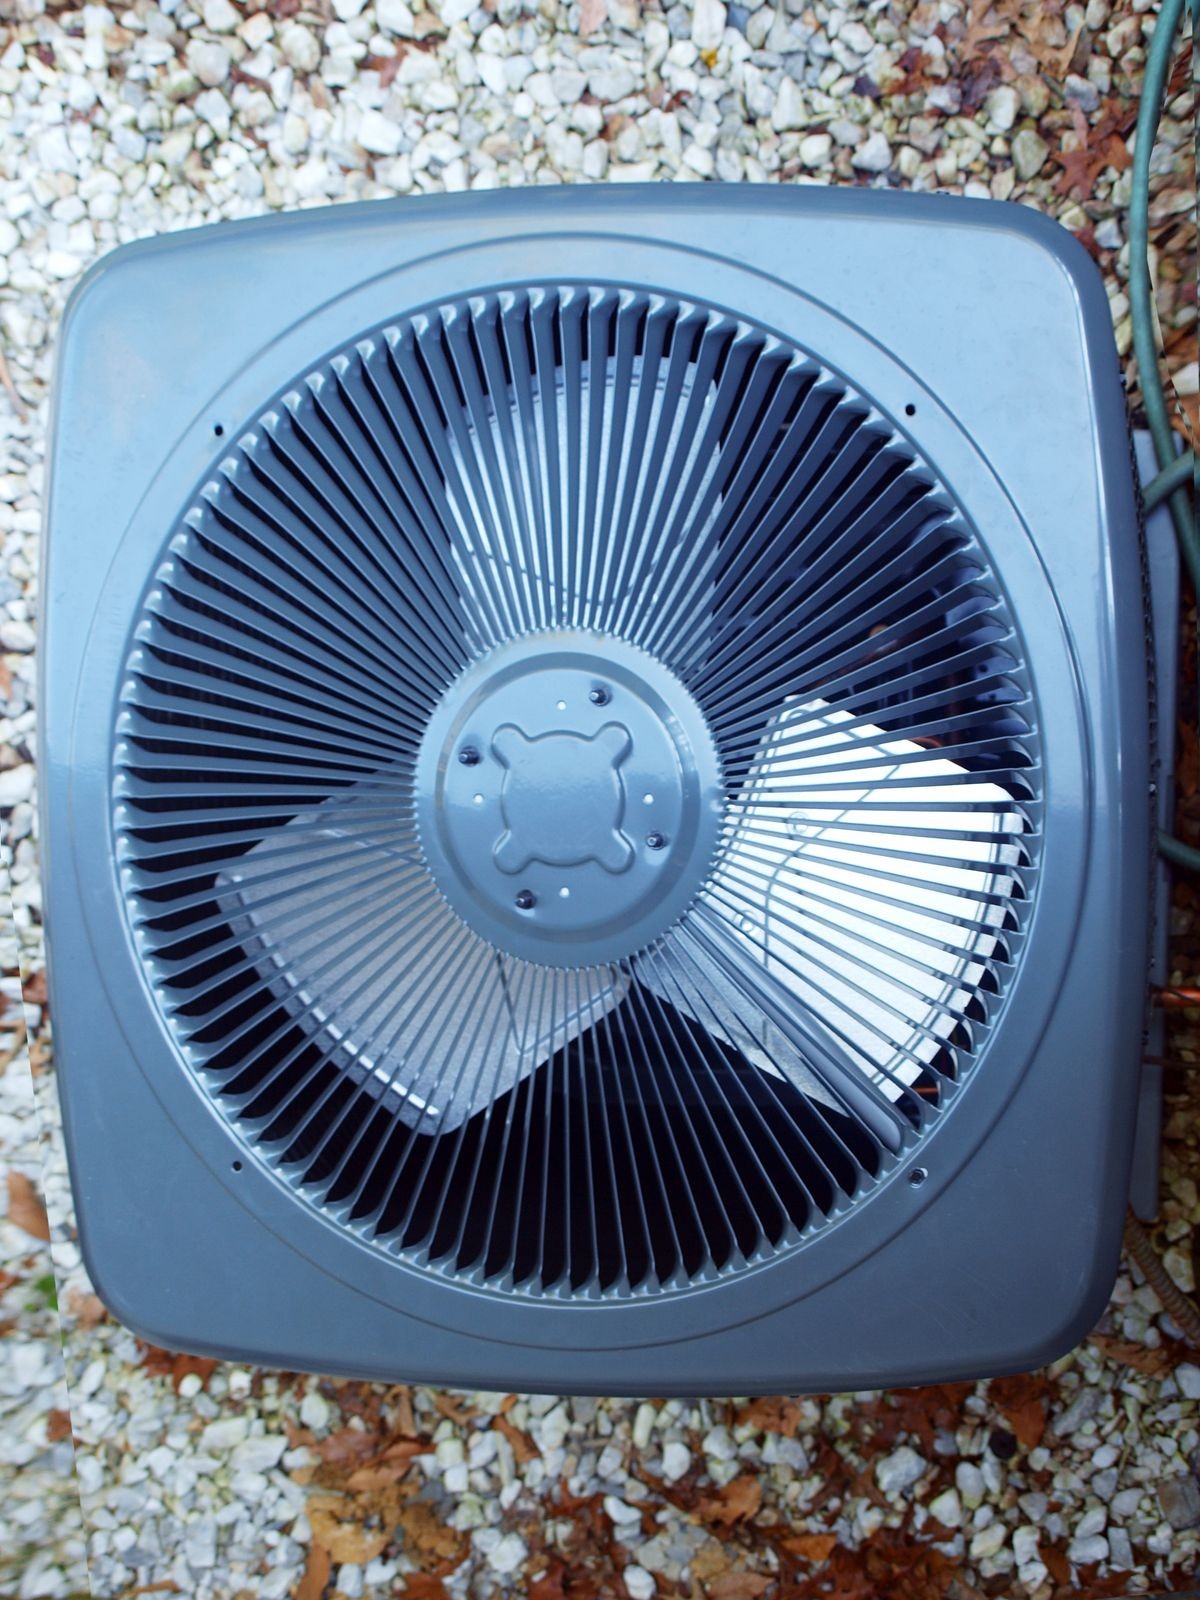 Top view of a outside airconditioning unit two and a half ton model